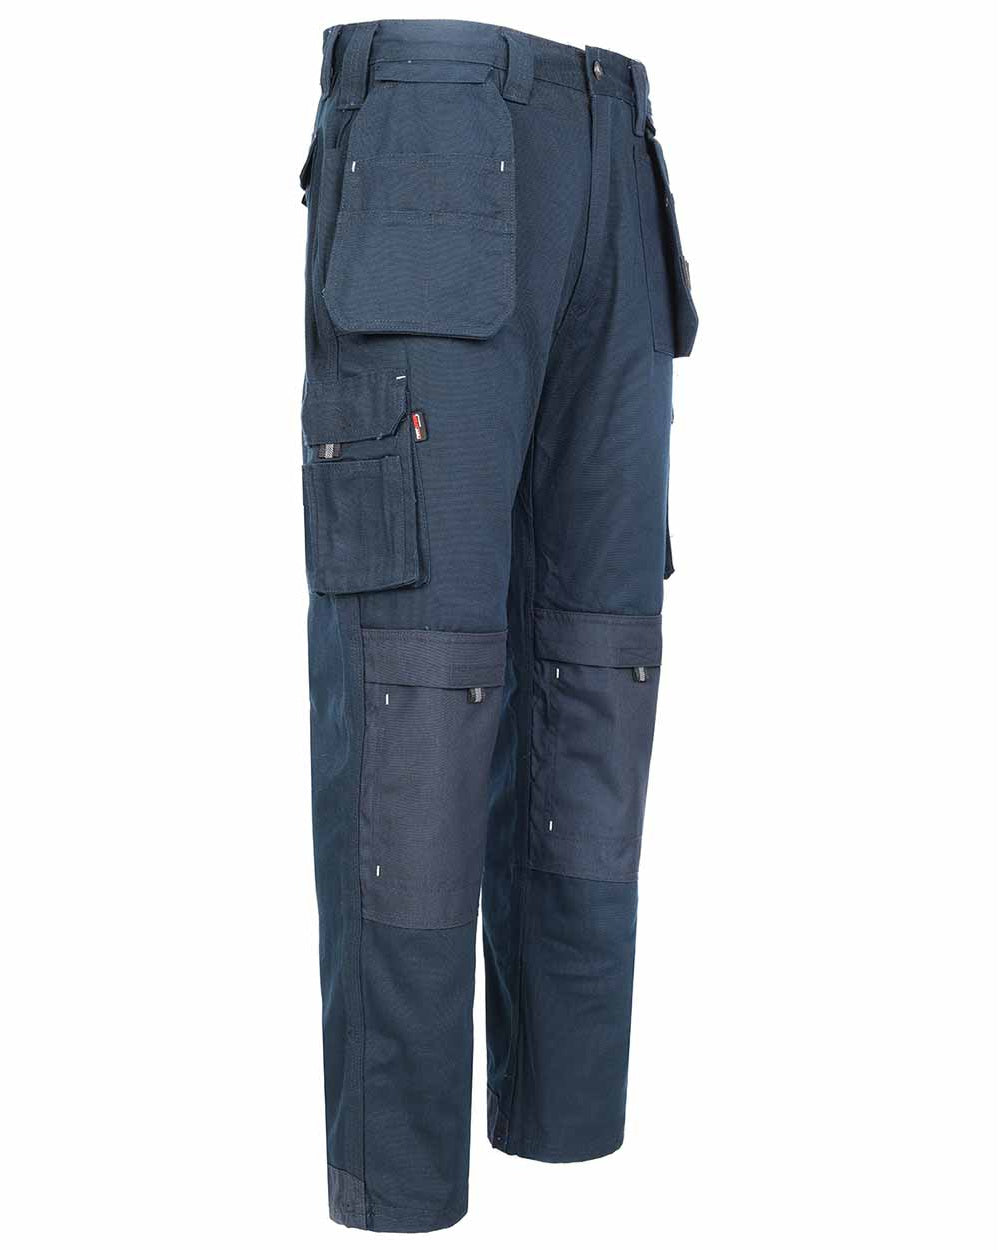 Navy Blue Coloured TuffStuff Extreme Work Trousers On A White Background 